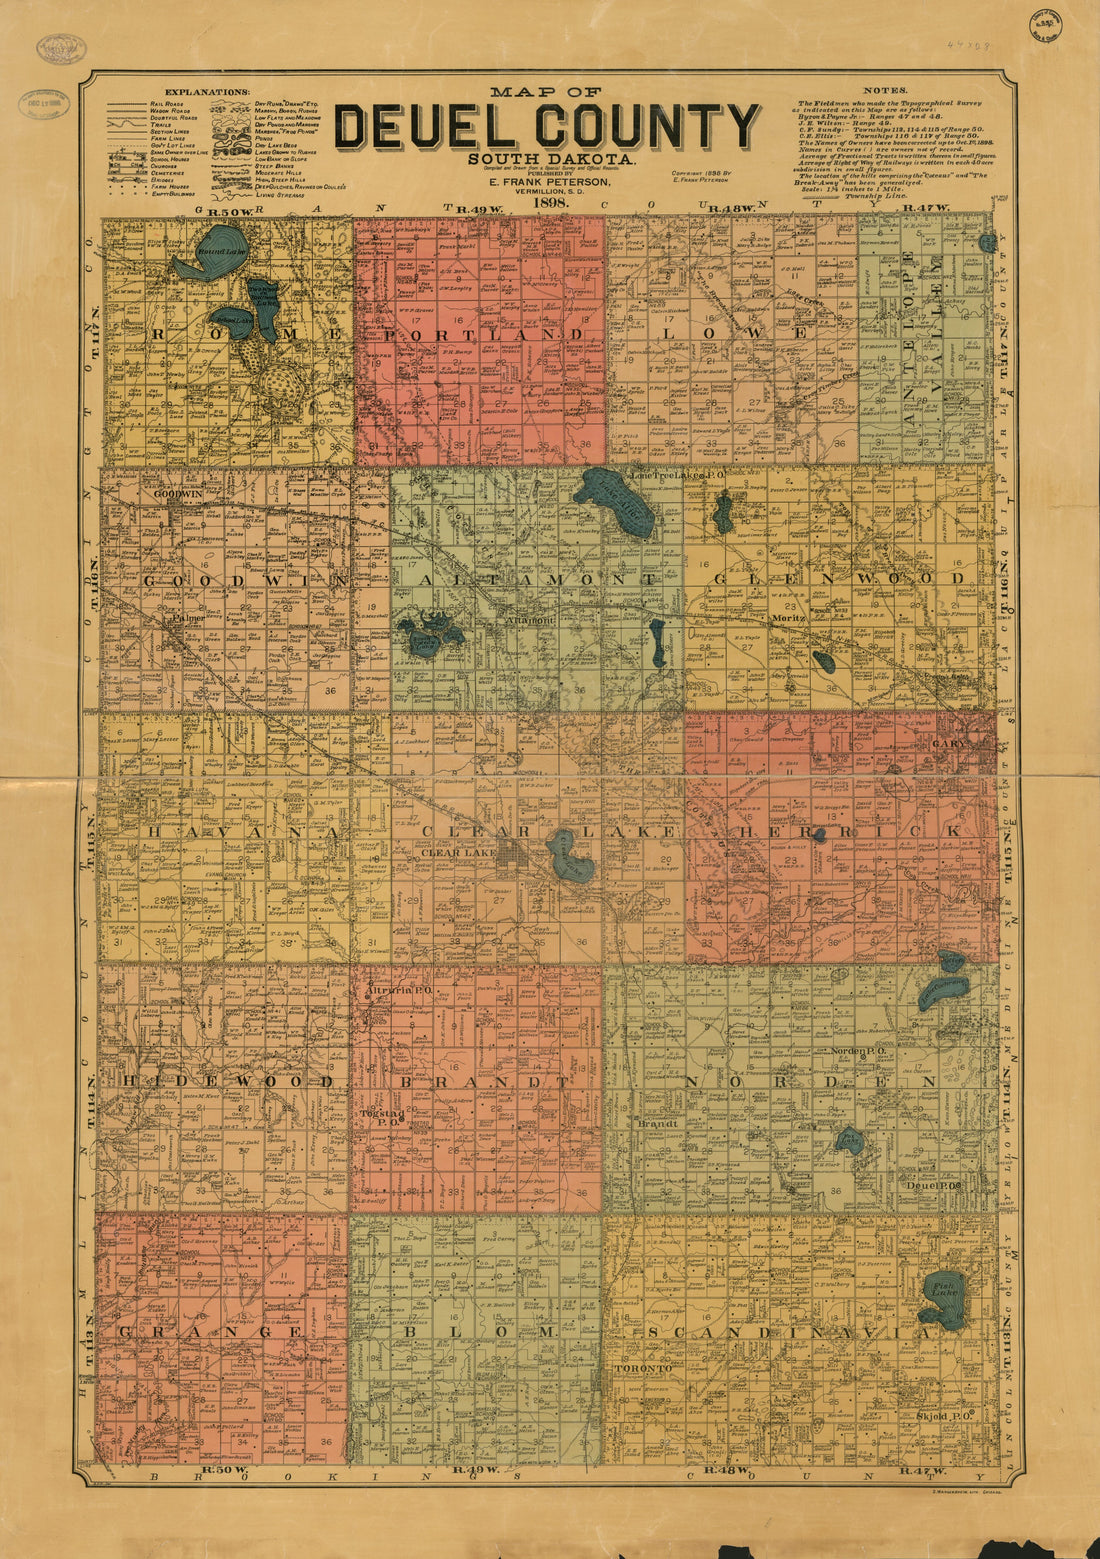 This old map of Map of Deuel County, South Dakota : Compiled and Drawn from a Special Survey and Official Records from 1899 was created by E. Frank Peterson, S. Wangersheim in 1899